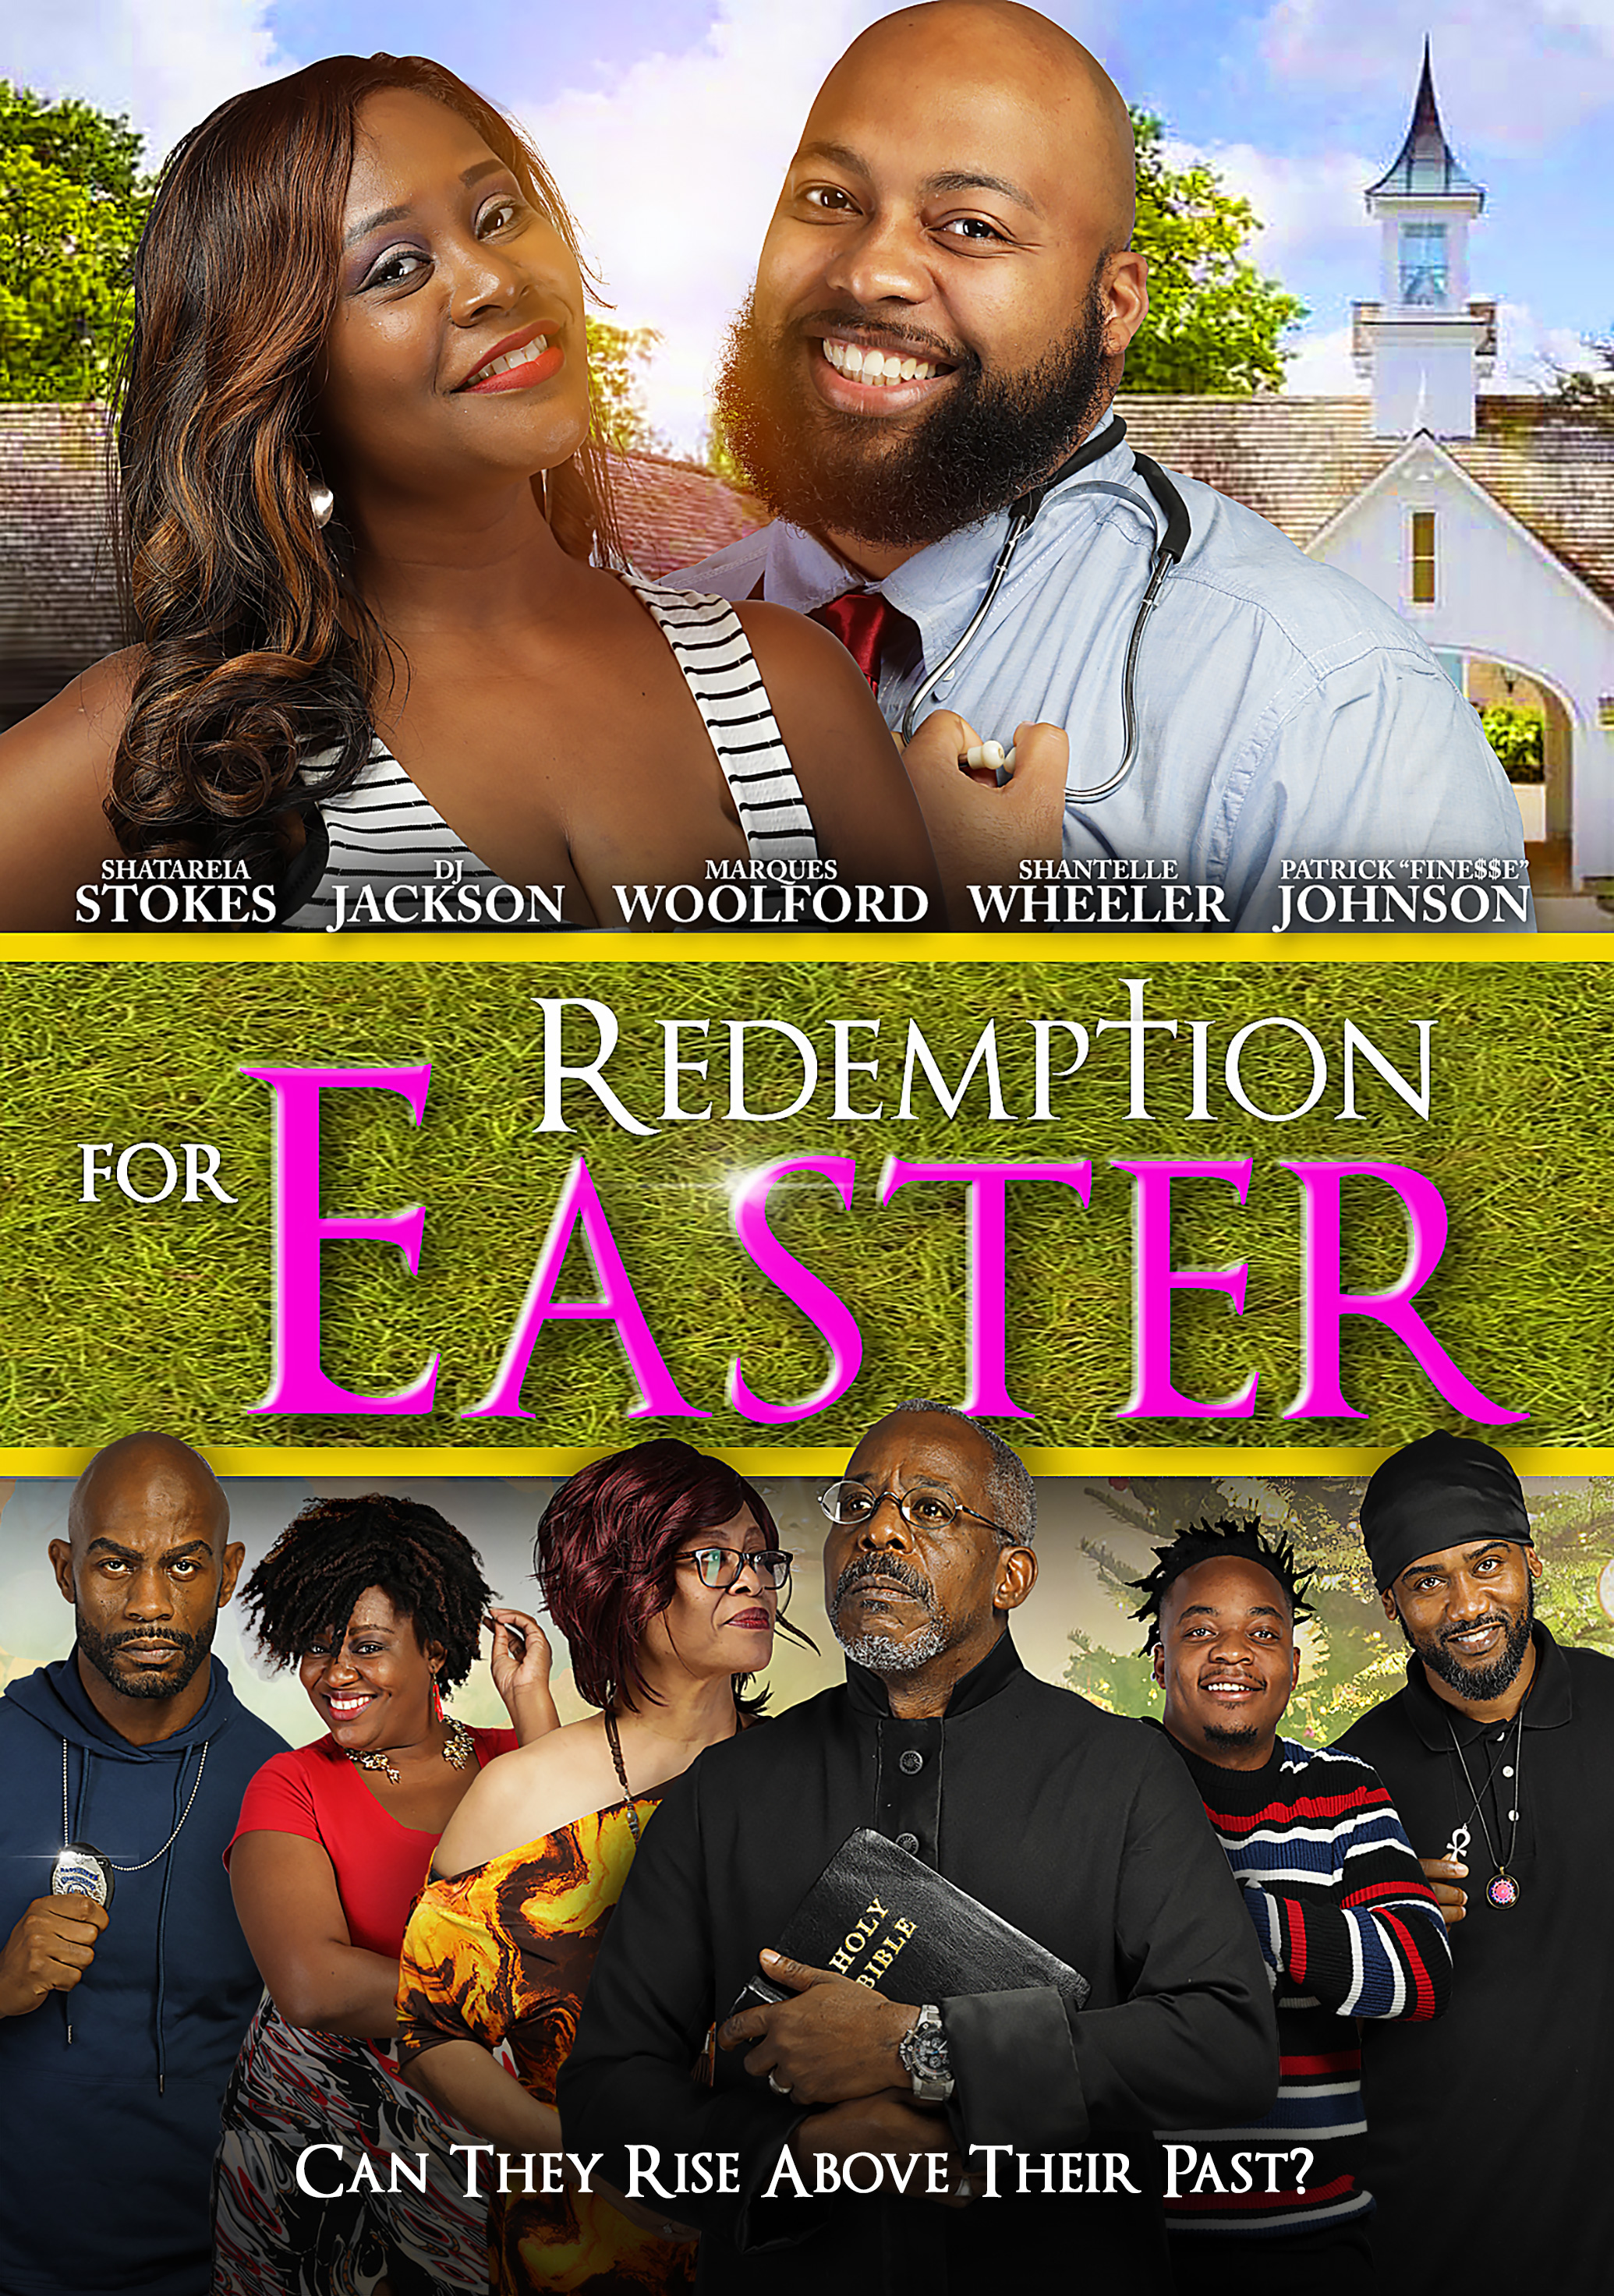 Redemption for Easter (2020) Drama, Directed By Karlton T